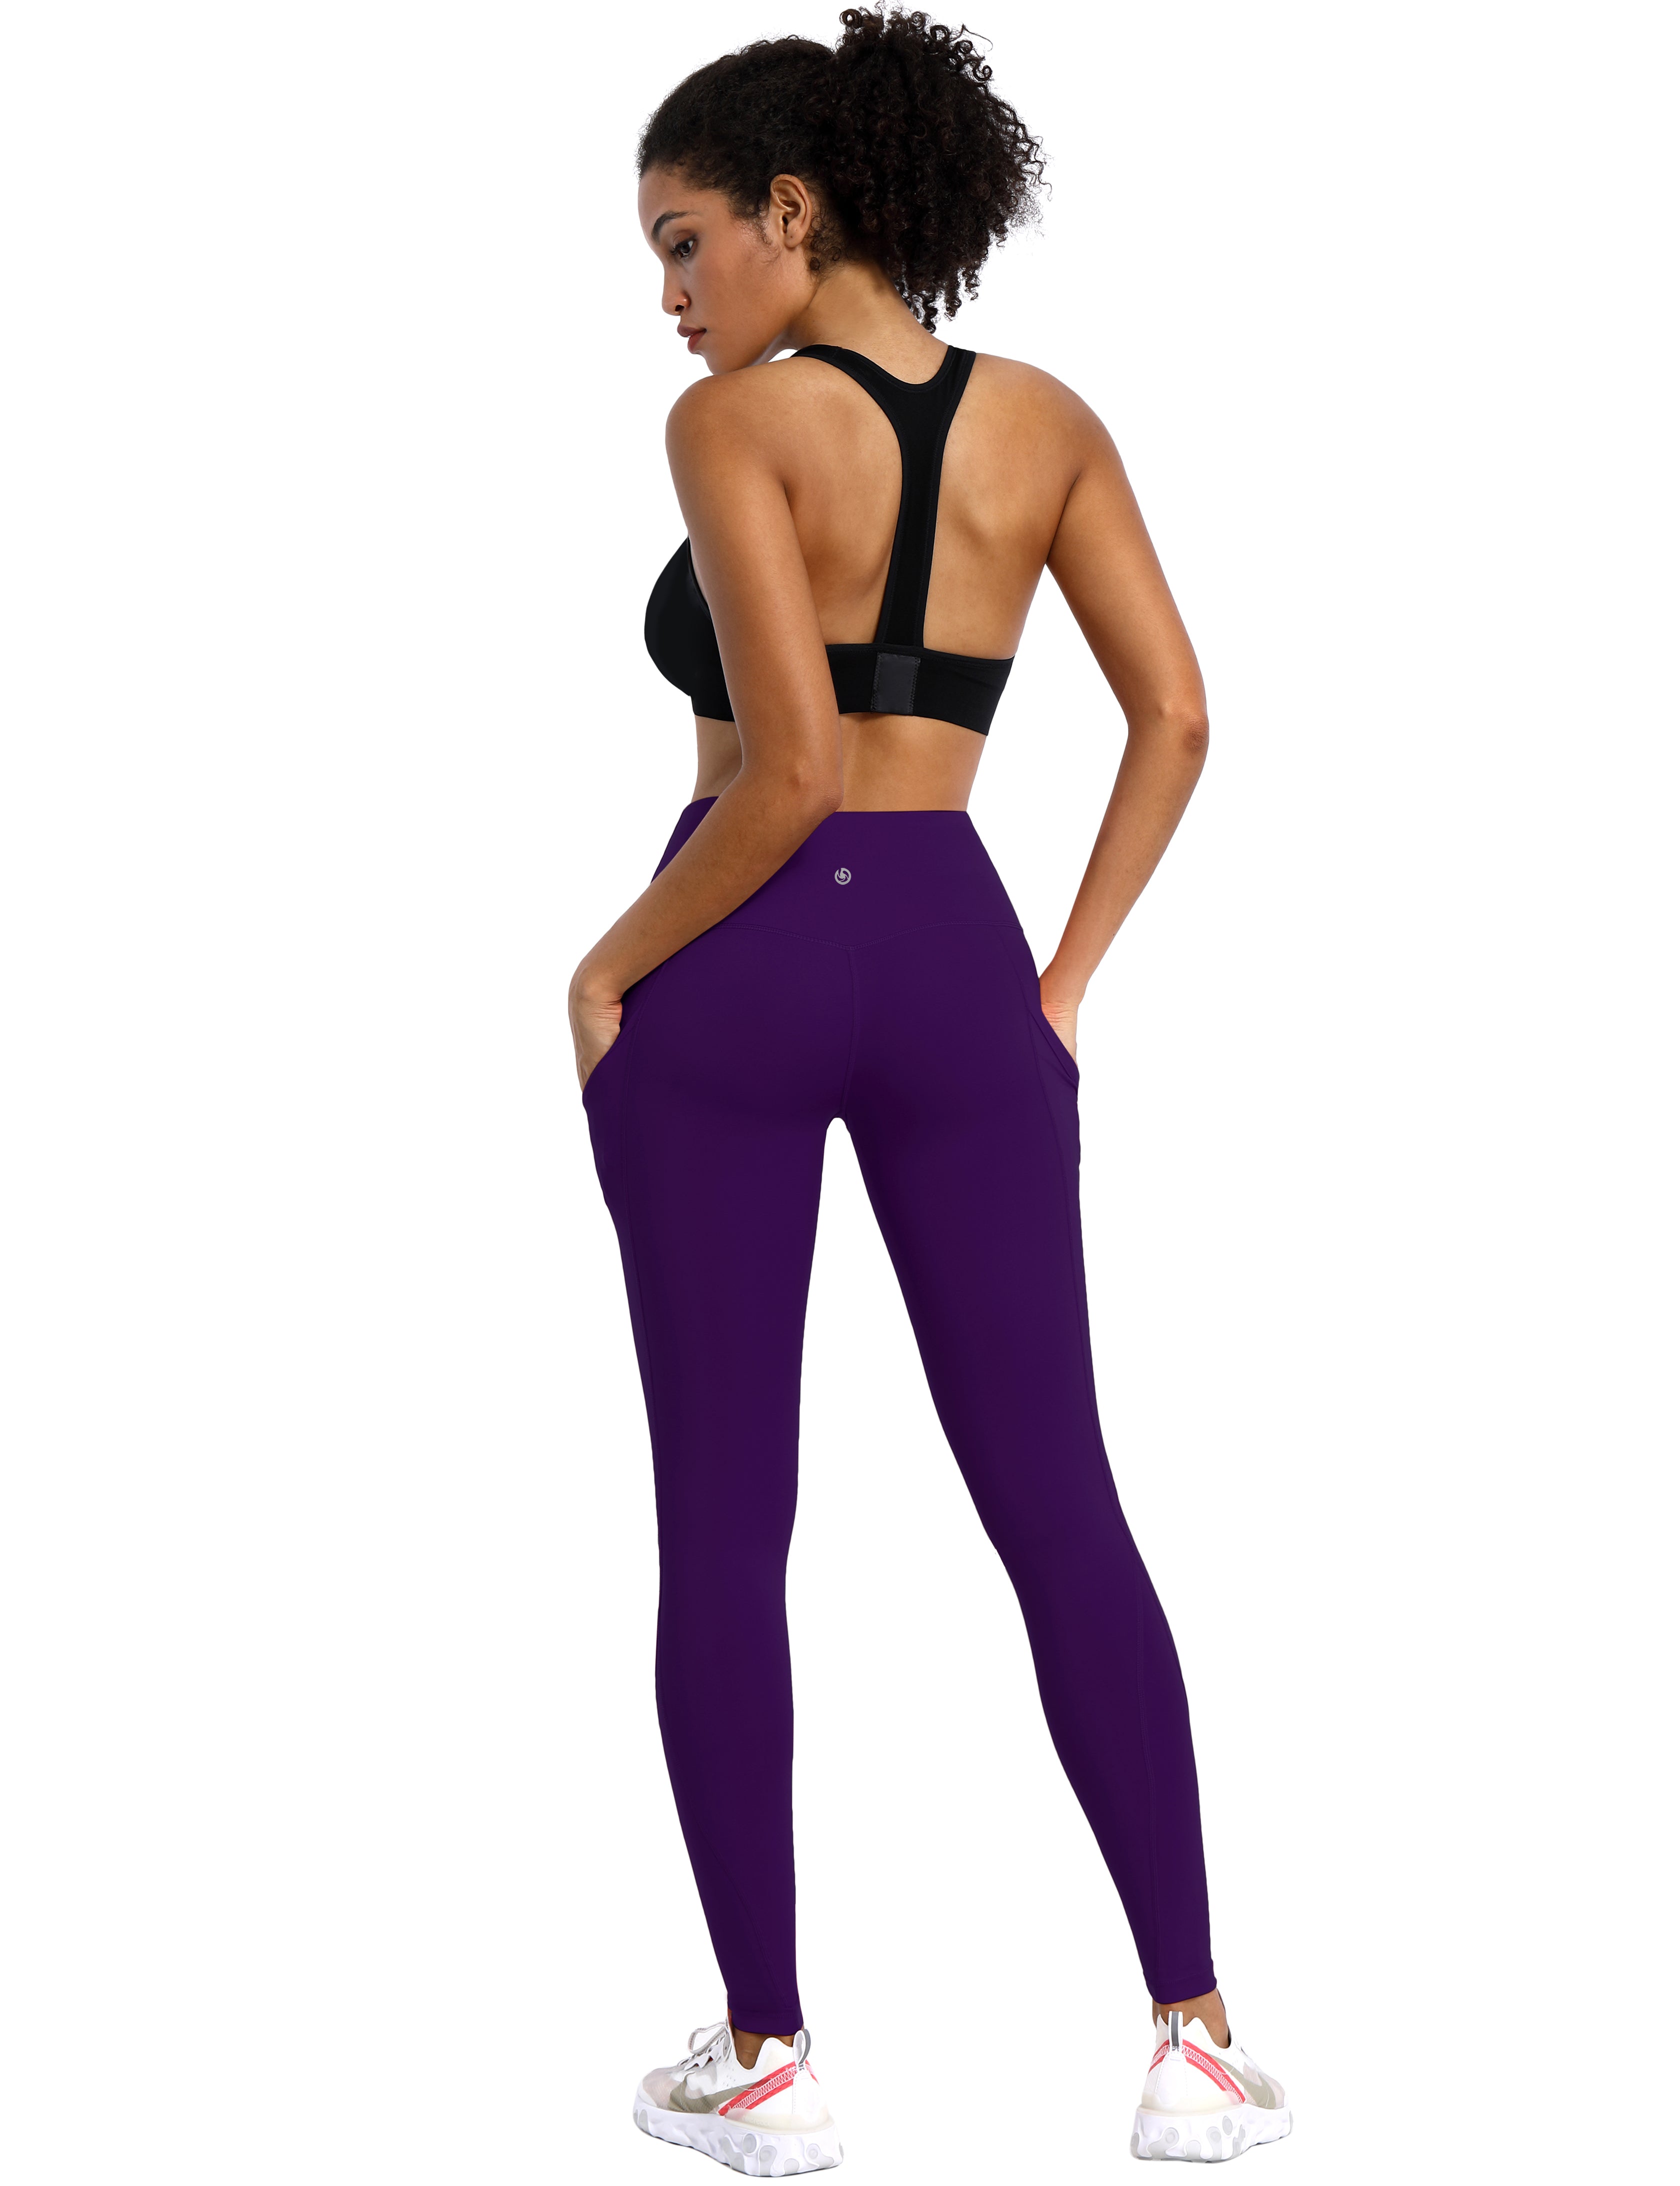 High Waist Side Pockets Yoga Pants pansypurple 75% Nylon, 25% Spandex Fabric doesn't attract lint easily 4-way stretch No see-through Moisture-wicking Tummy control Inner pocket